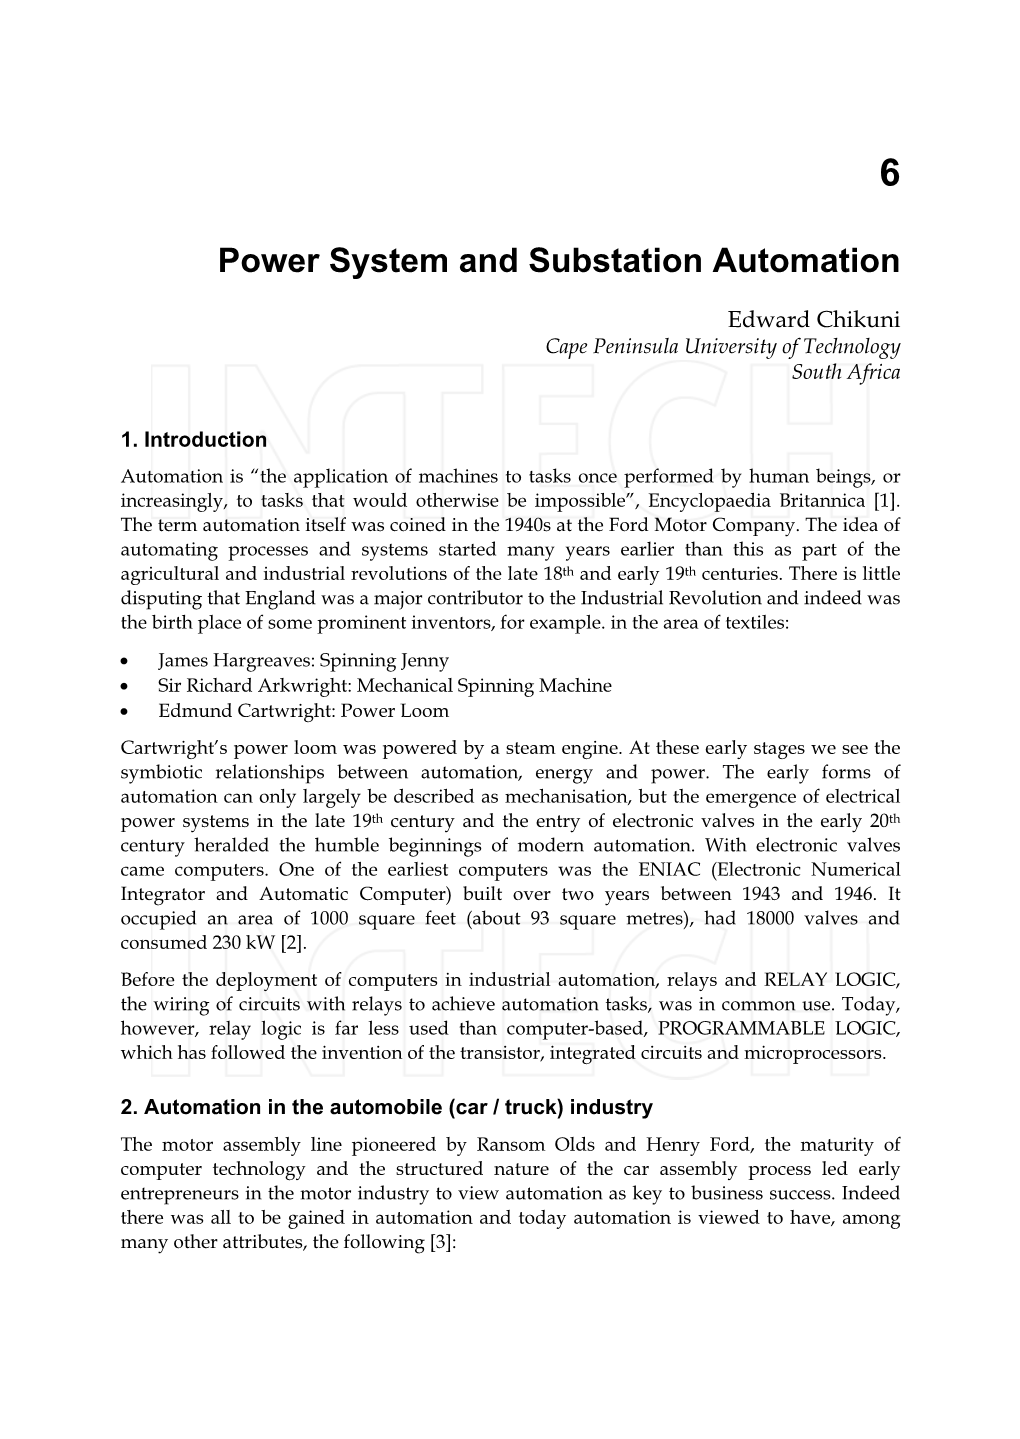 Power System and Substation Automation